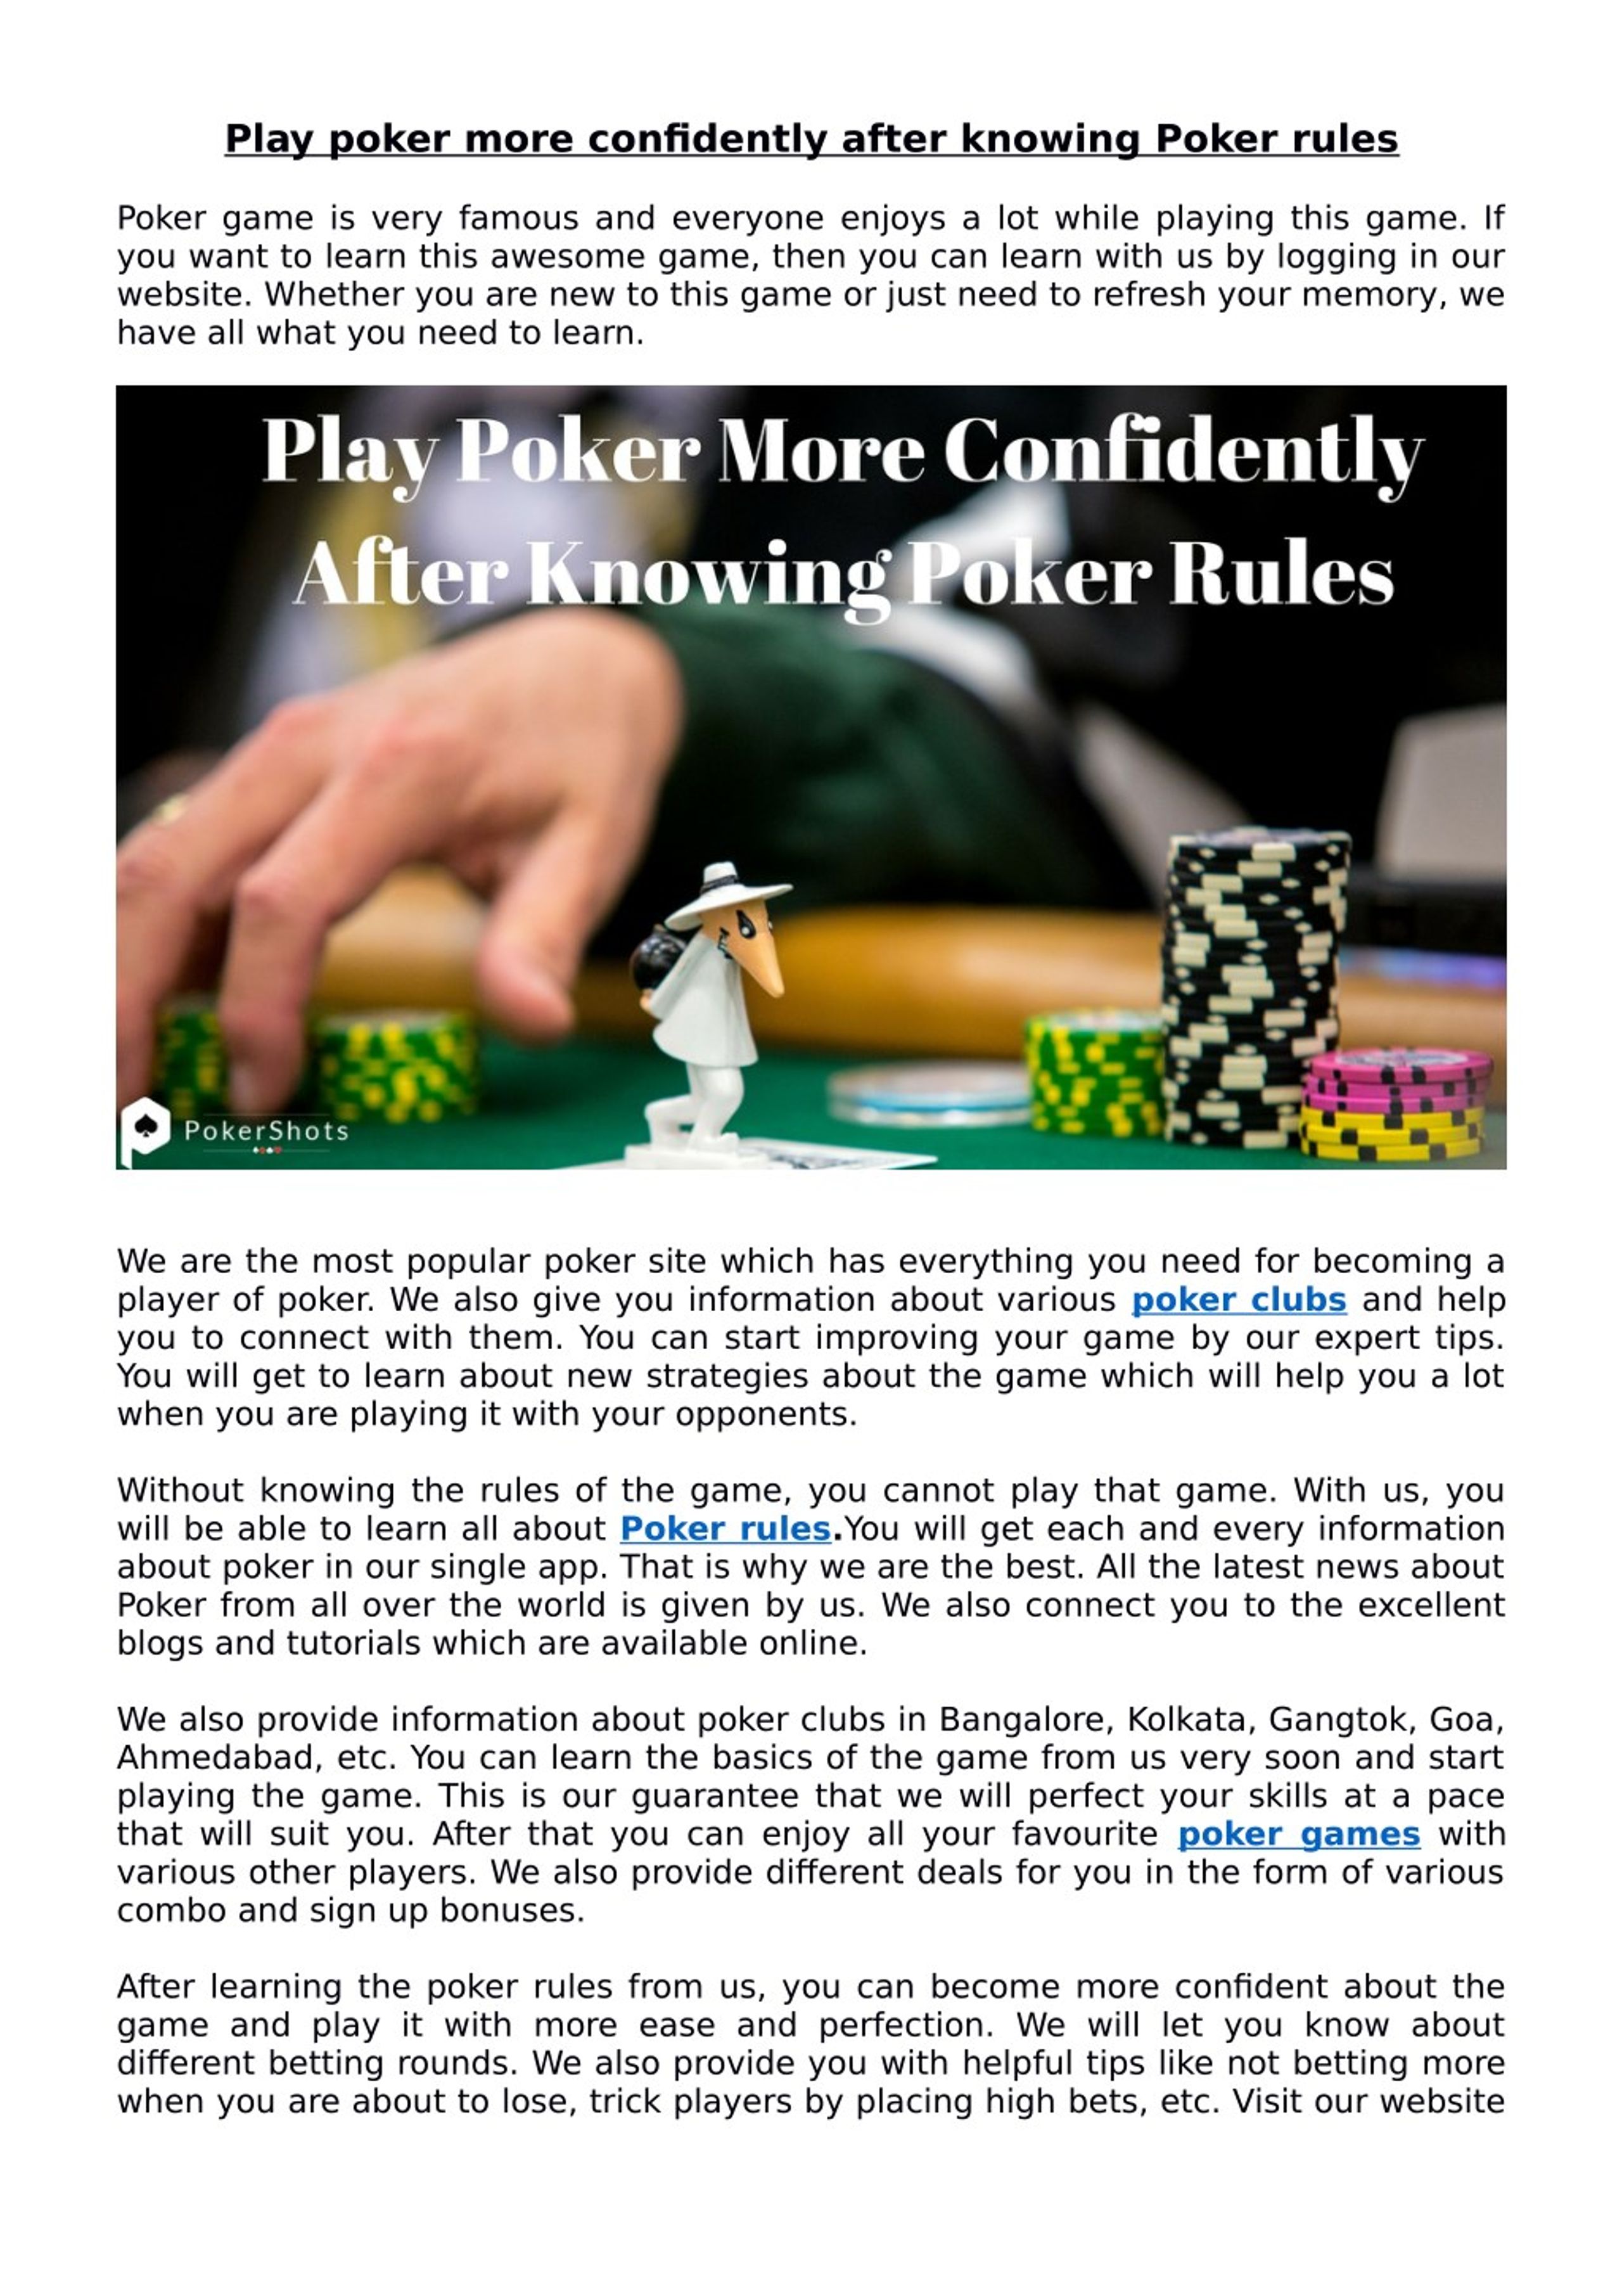 All in Poker Rules - When Should You Go All in?